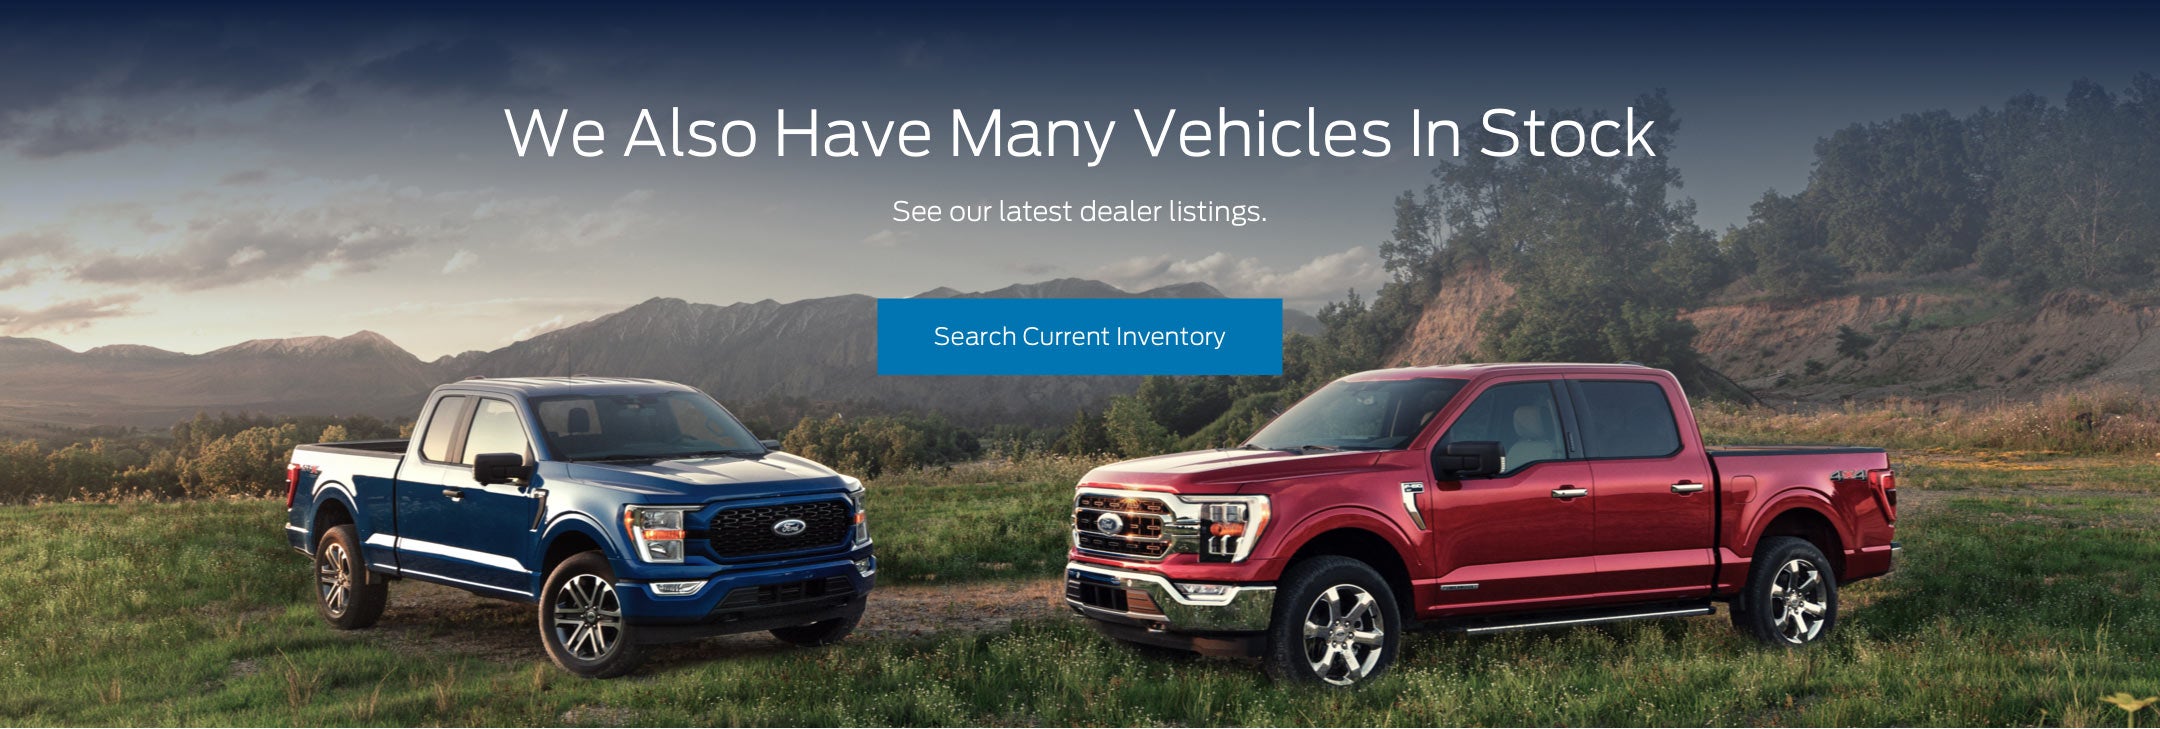 Ford vehicles in stock | Bluebonnet Ford in New Braunfels TX